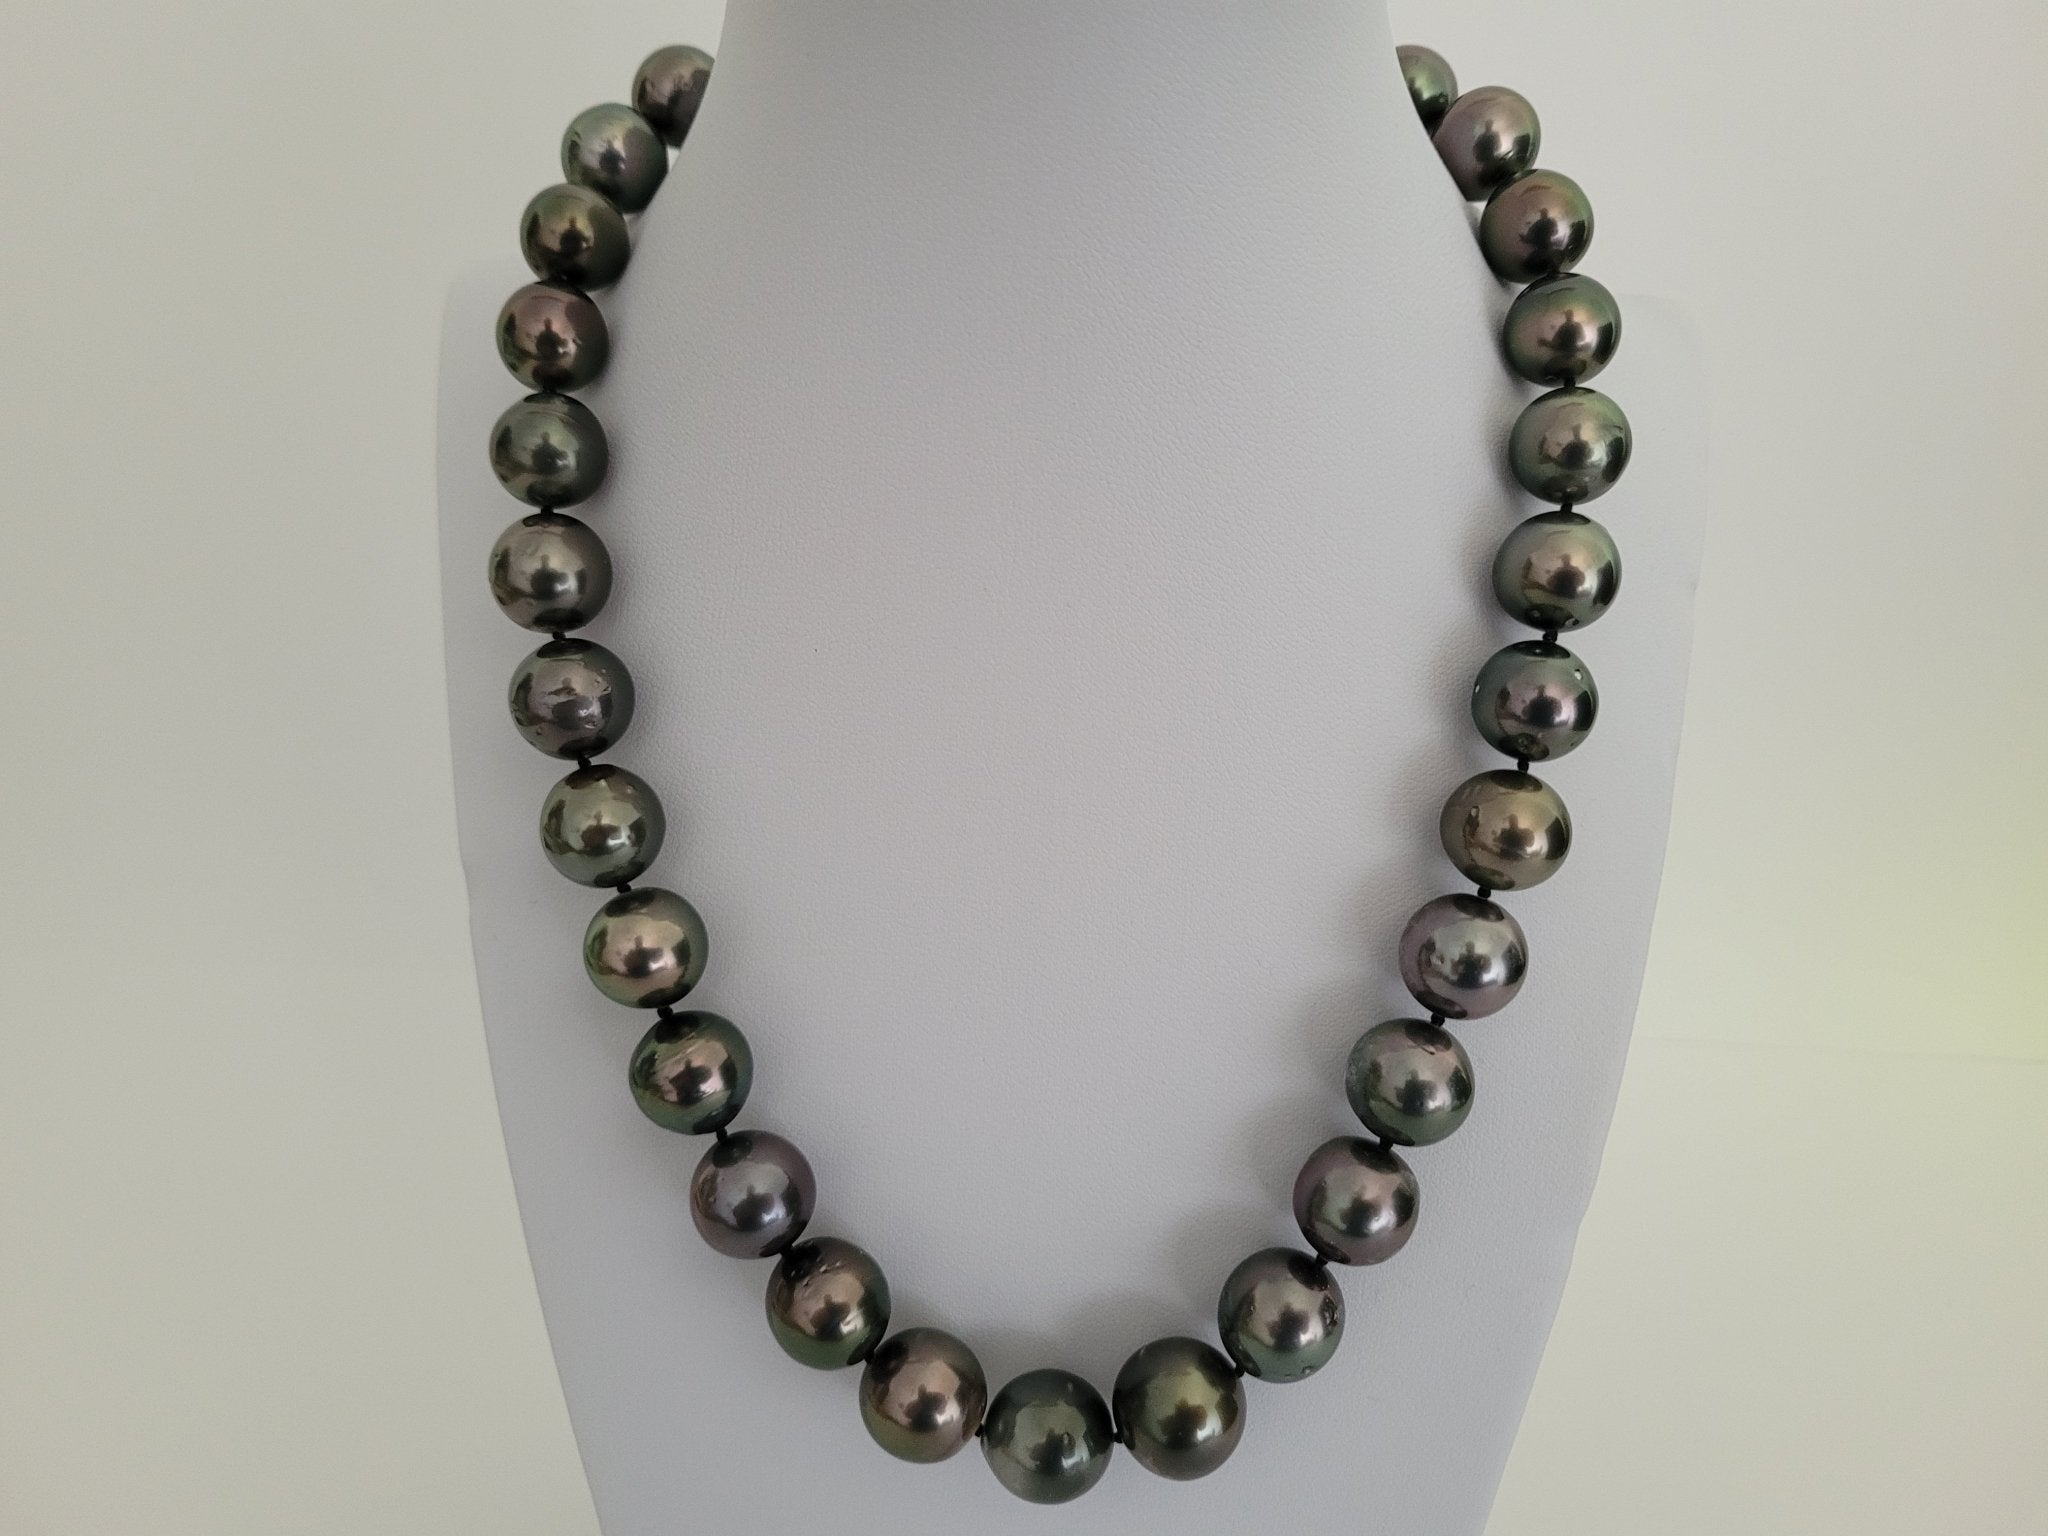 Natural Color White South Sea Cultured Pearls, 18 Inches | Pearl Jewelry Stores Long Island